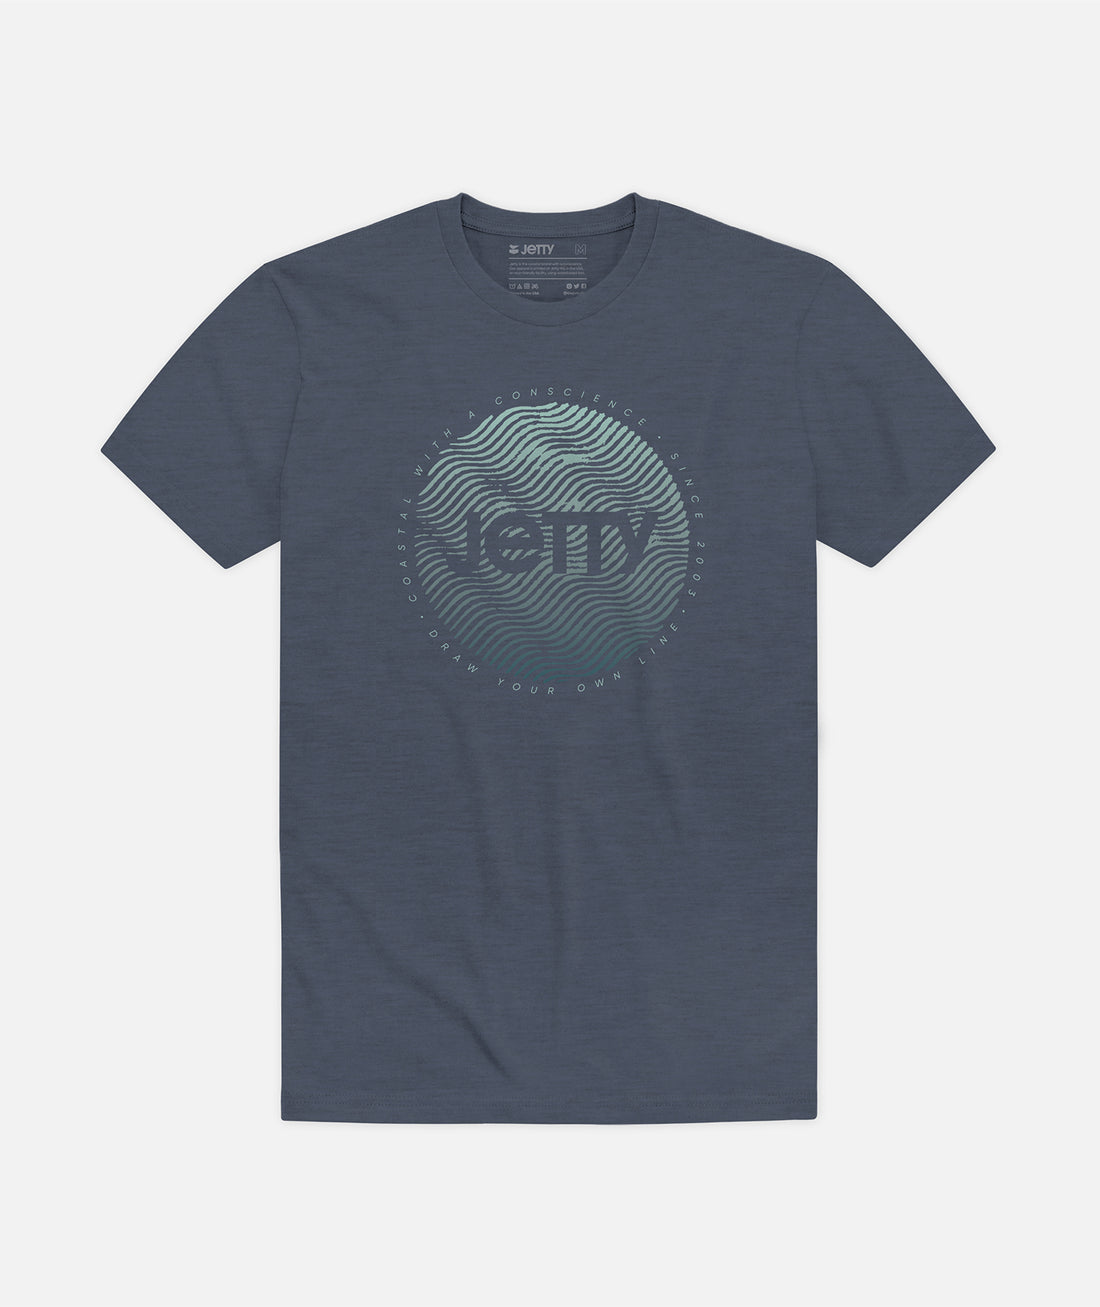 Jetty Men's Groundswell Tee Apparel Jetty Small Navy-NVY 